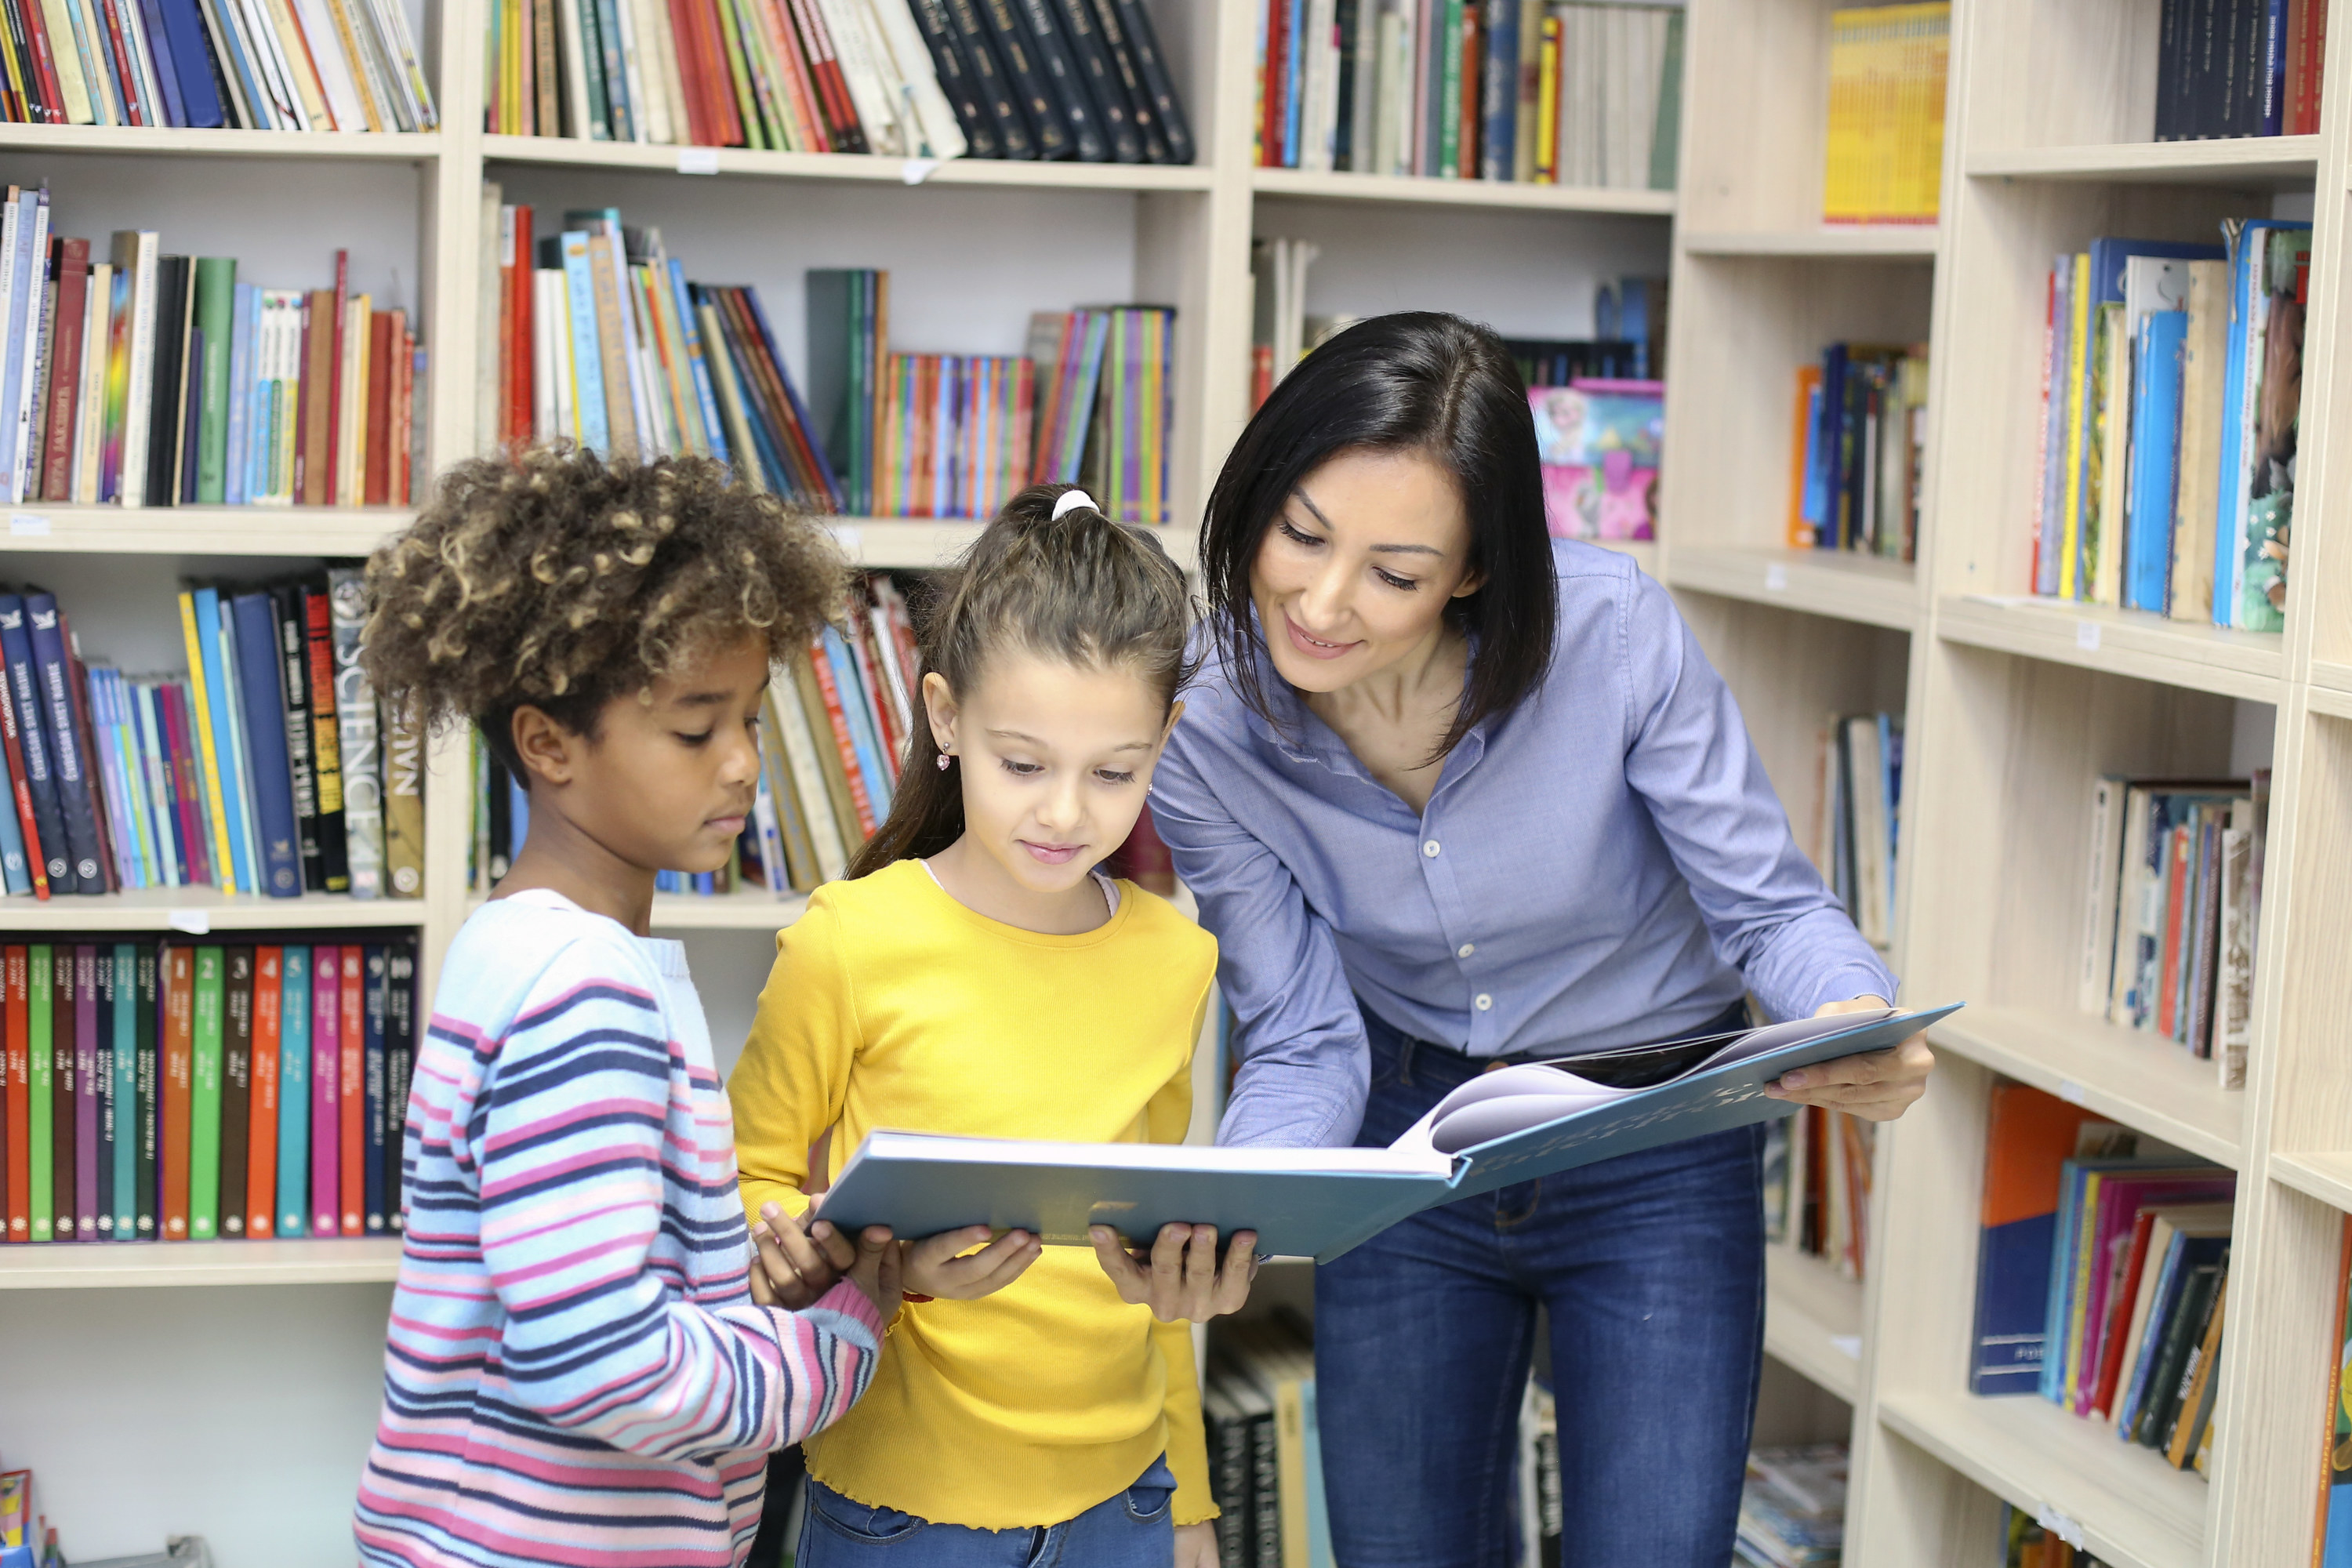 Librarian showing a book to two young children